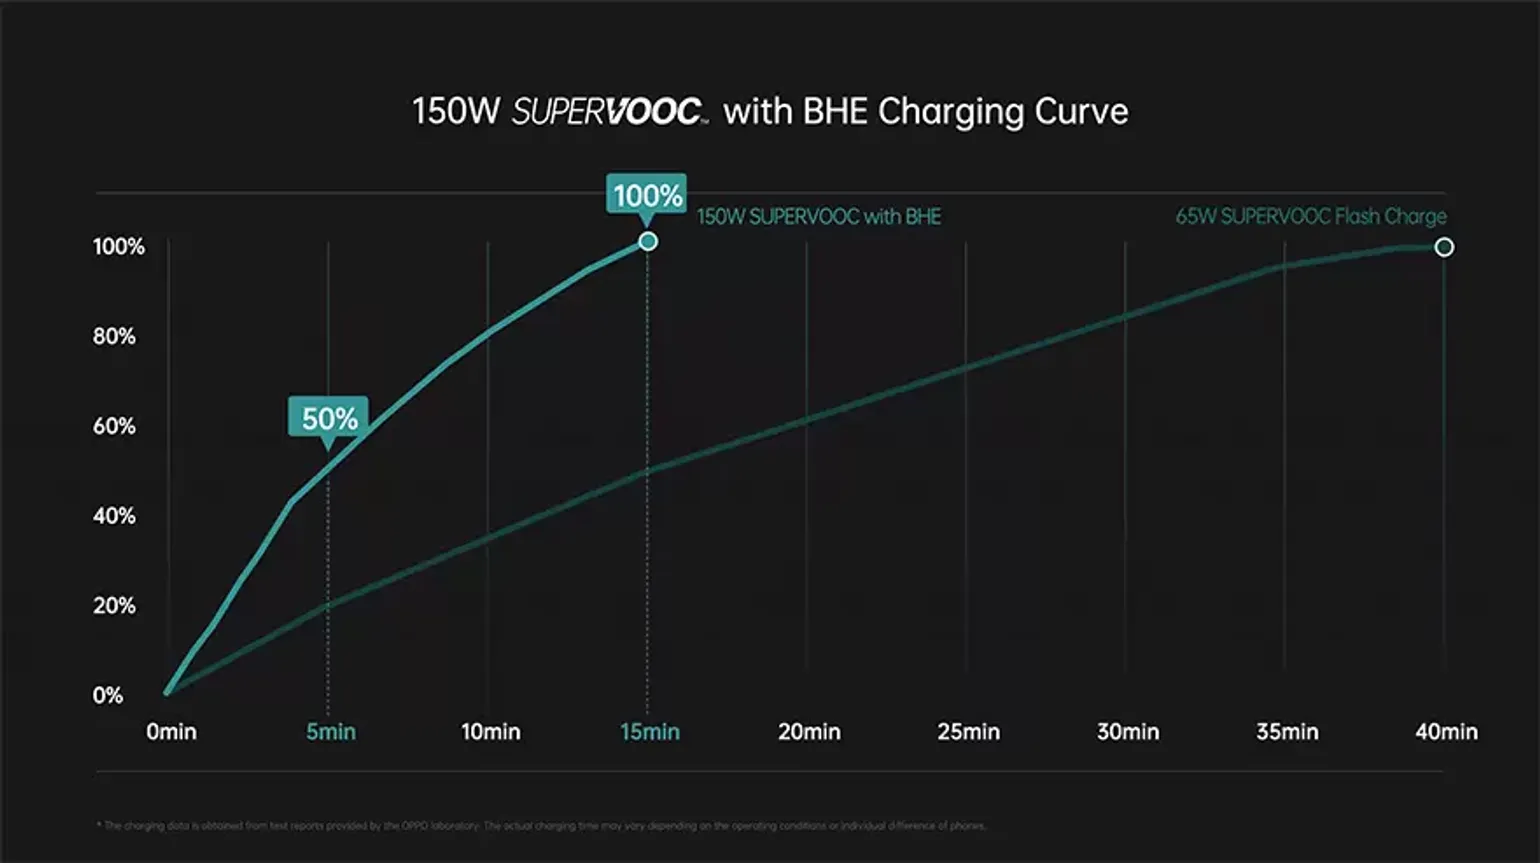 Oppo’s fastest 150W SuperVOOC technology can charge your phone to 50% in 5 minutes